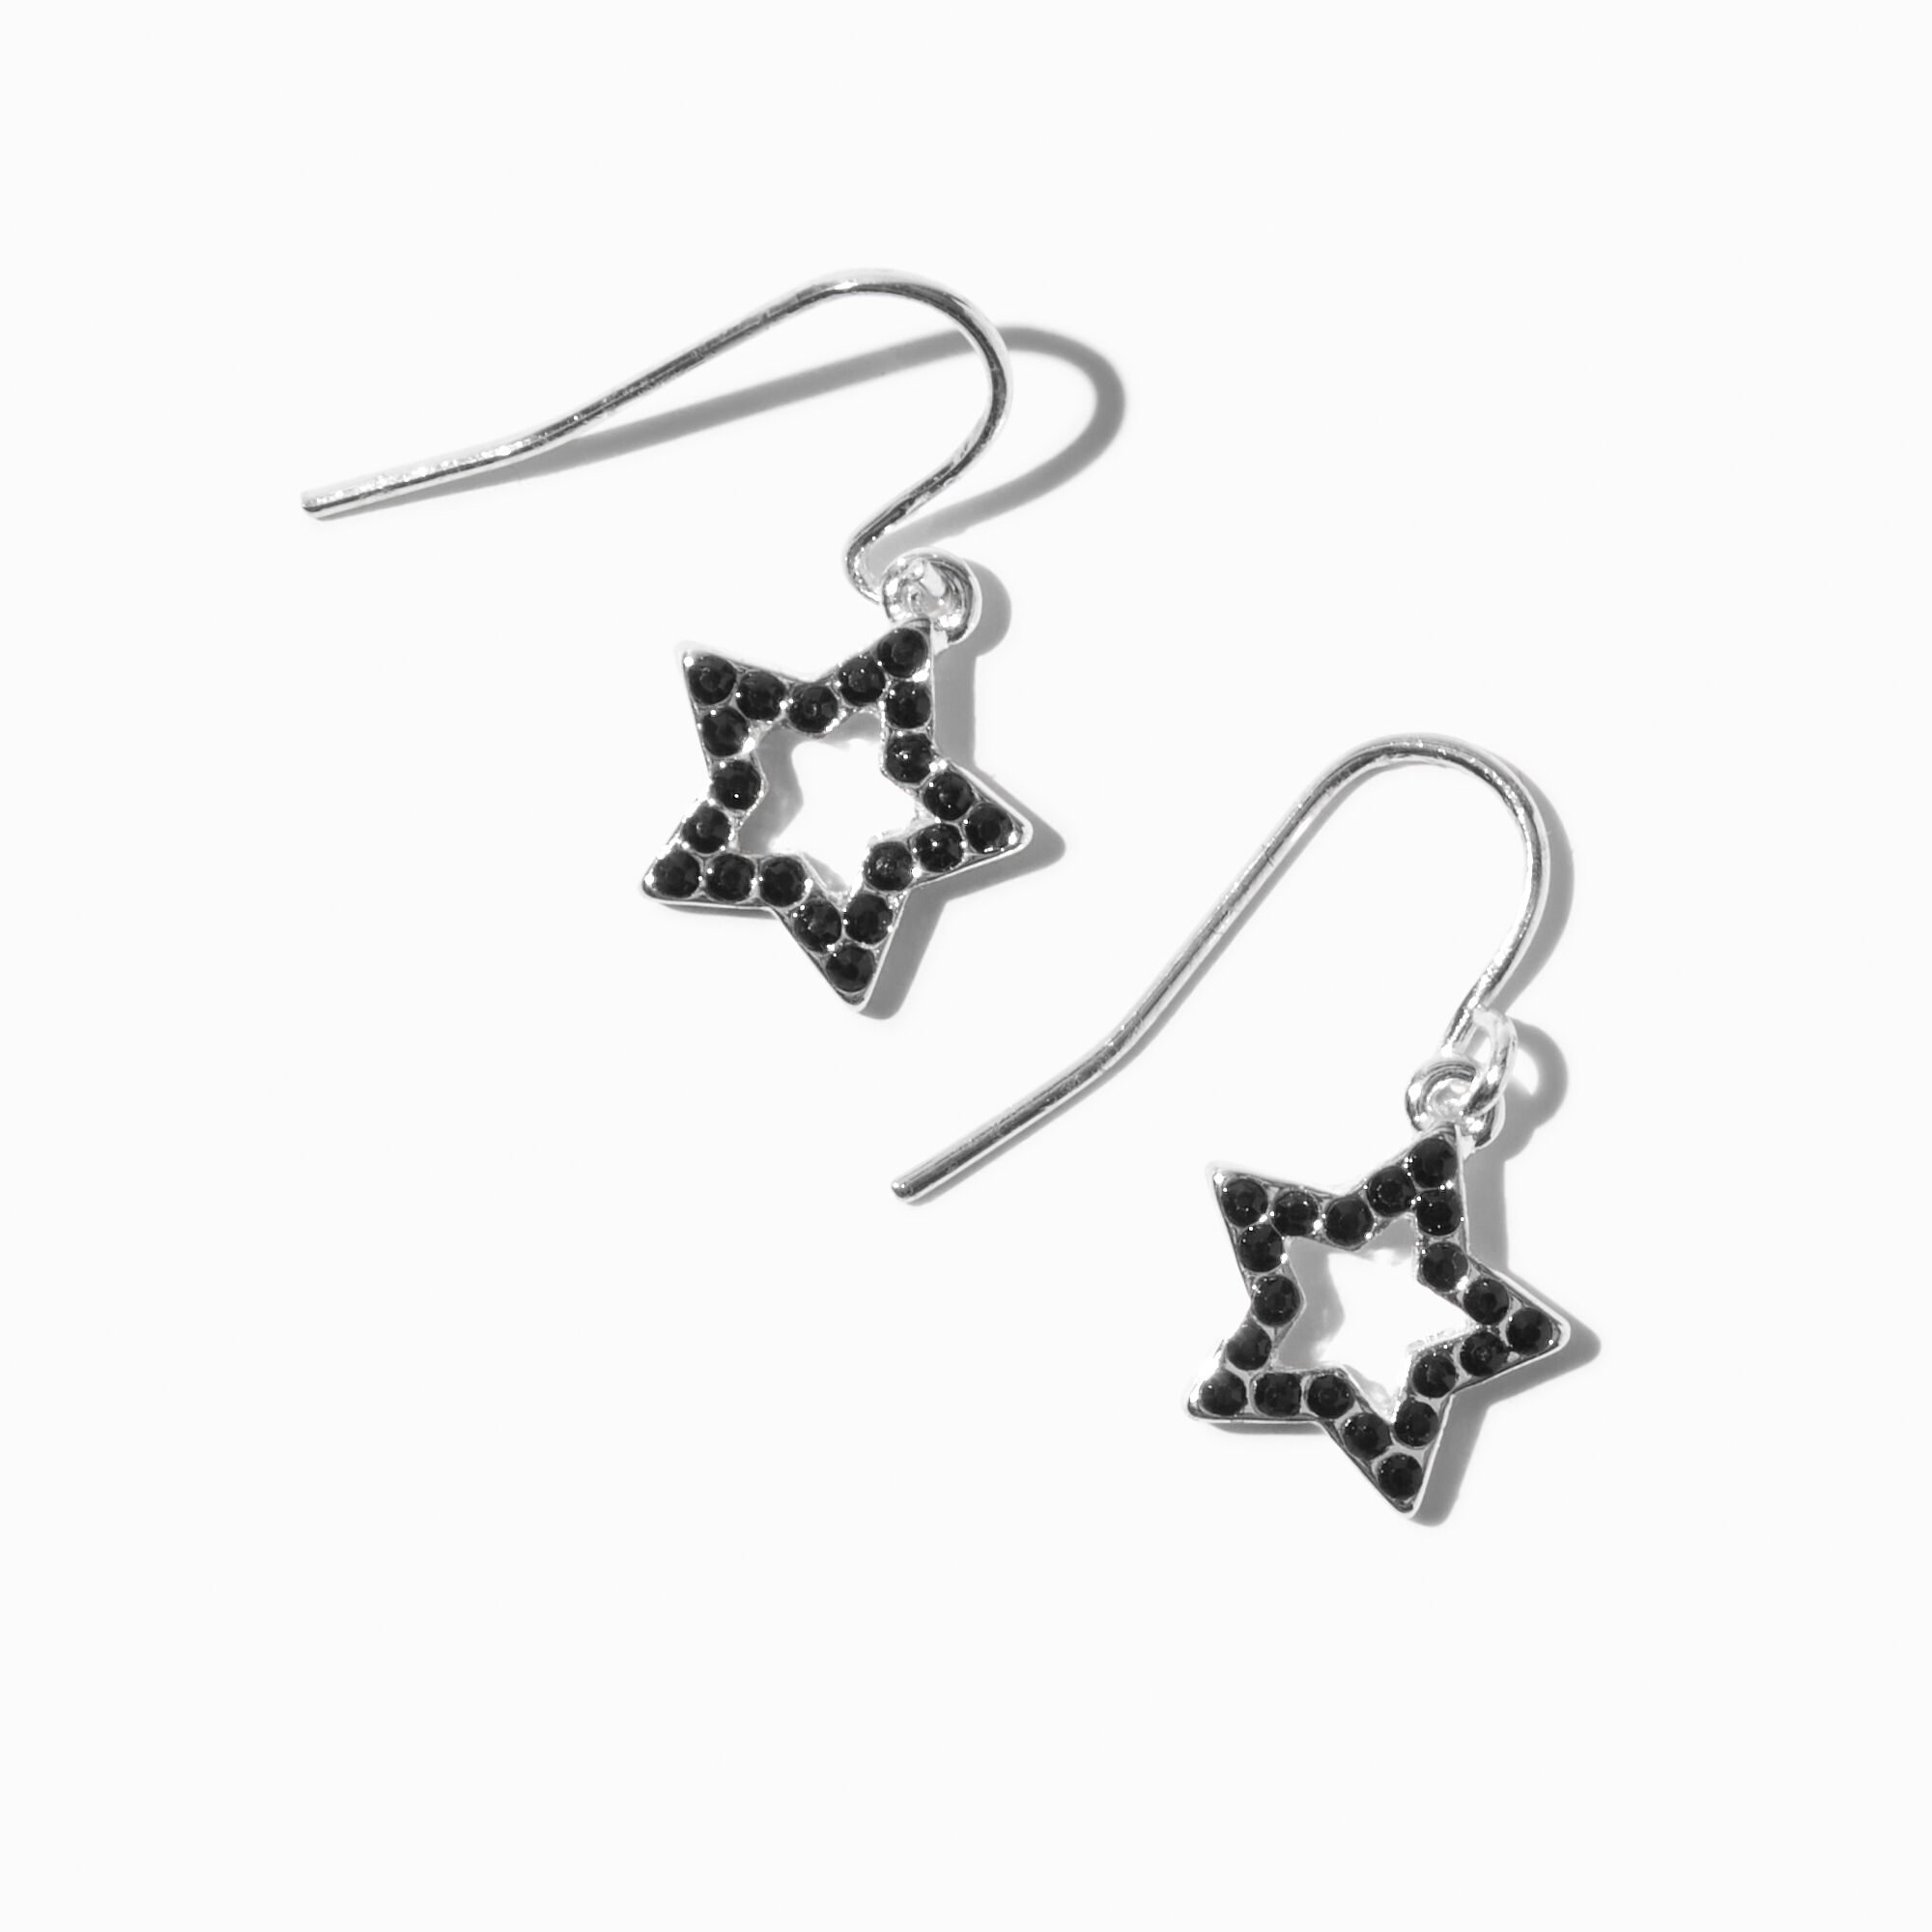 View Claires Crystal SilverTone Star 05 Drop Earrings Black information